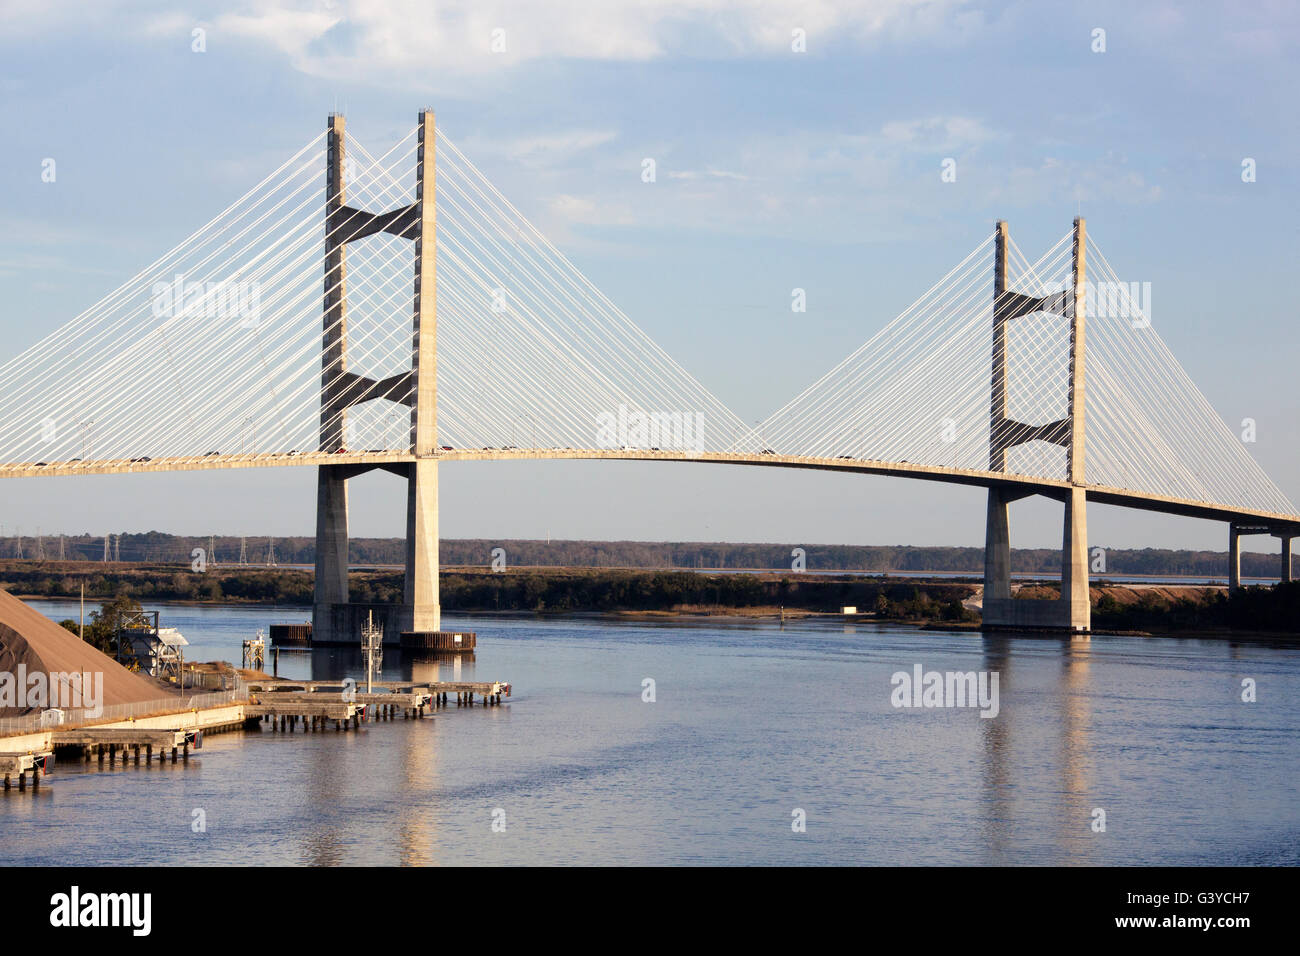 The view of a bridge over St. Johns River in the city of Jacksonville (Florida). Stock Photo